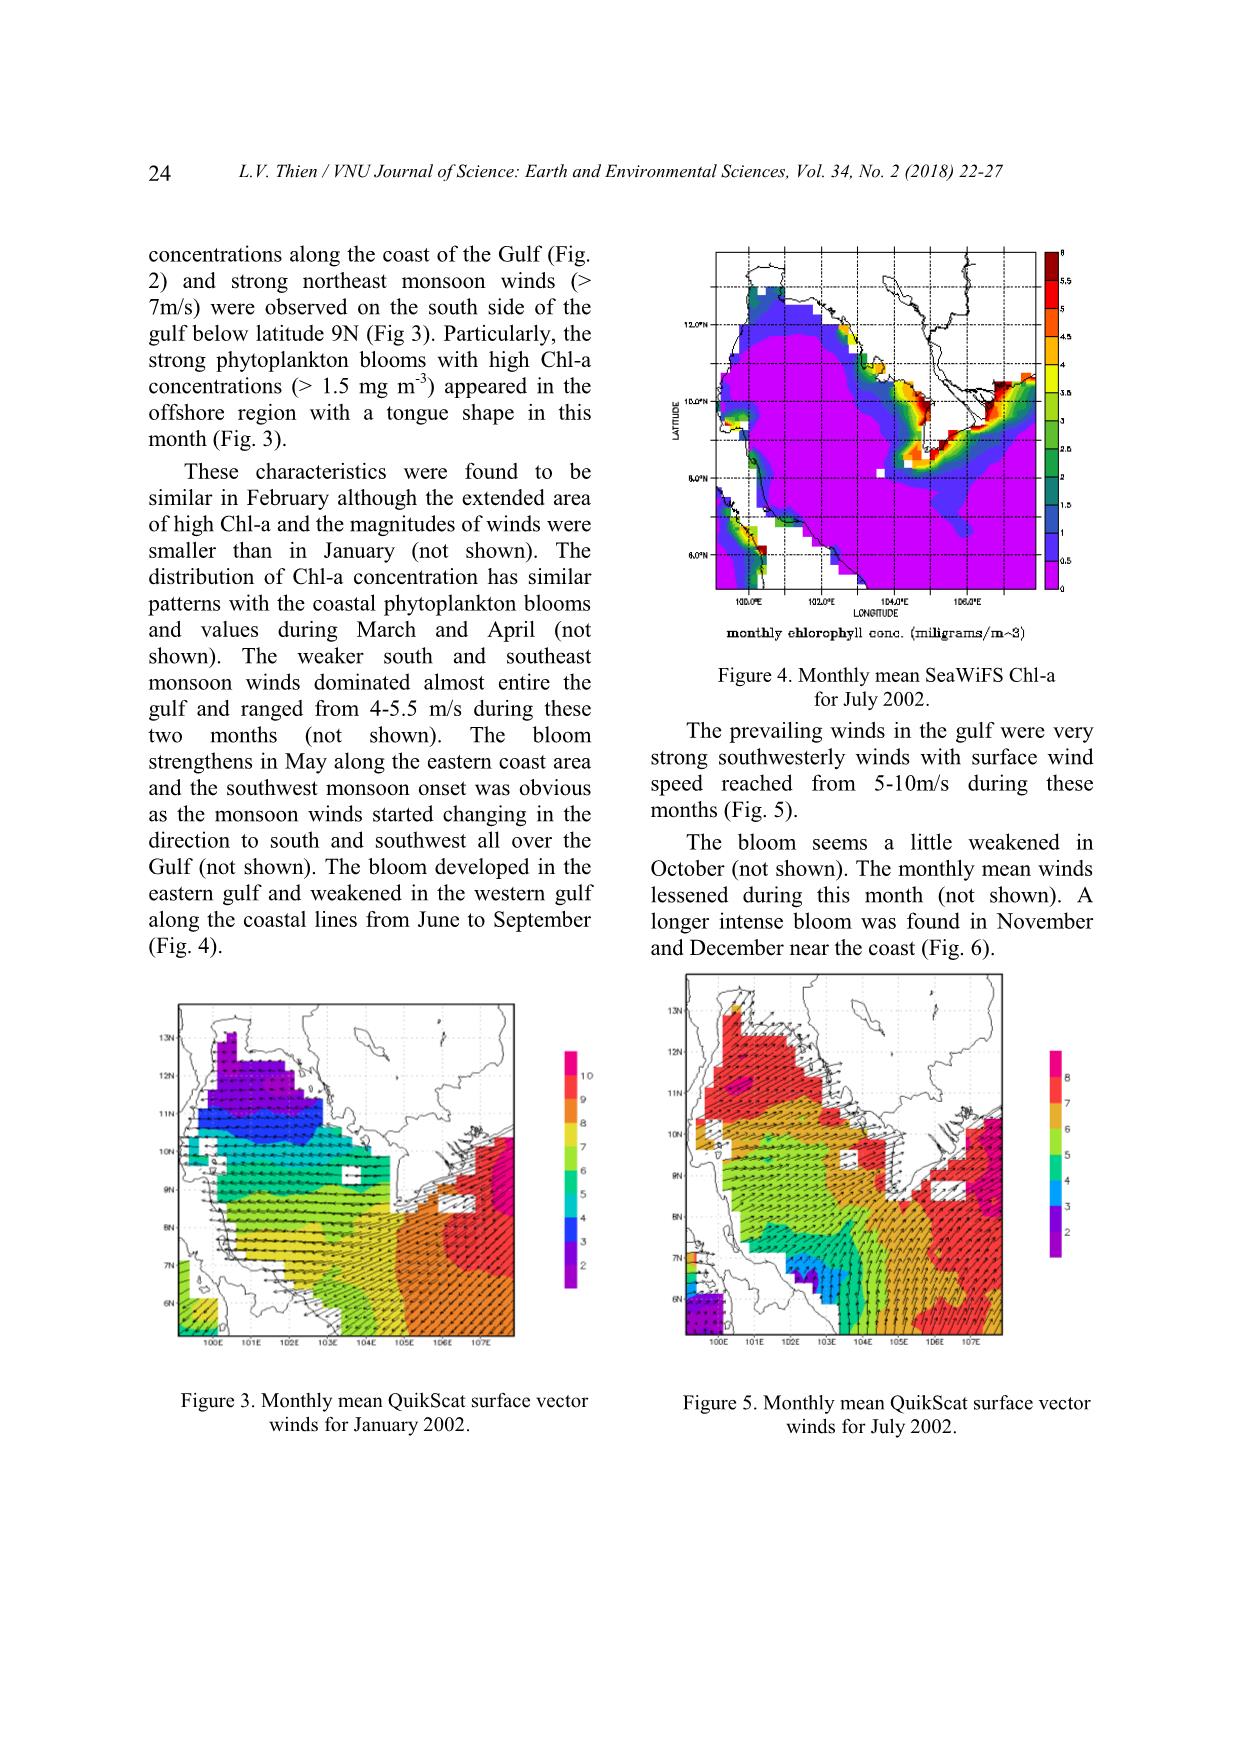 Effects of Monsoon Activity on Monthly Phytoplankton Blooms in the Gulf of Thai Land in El Nino Year 2002 trang 3